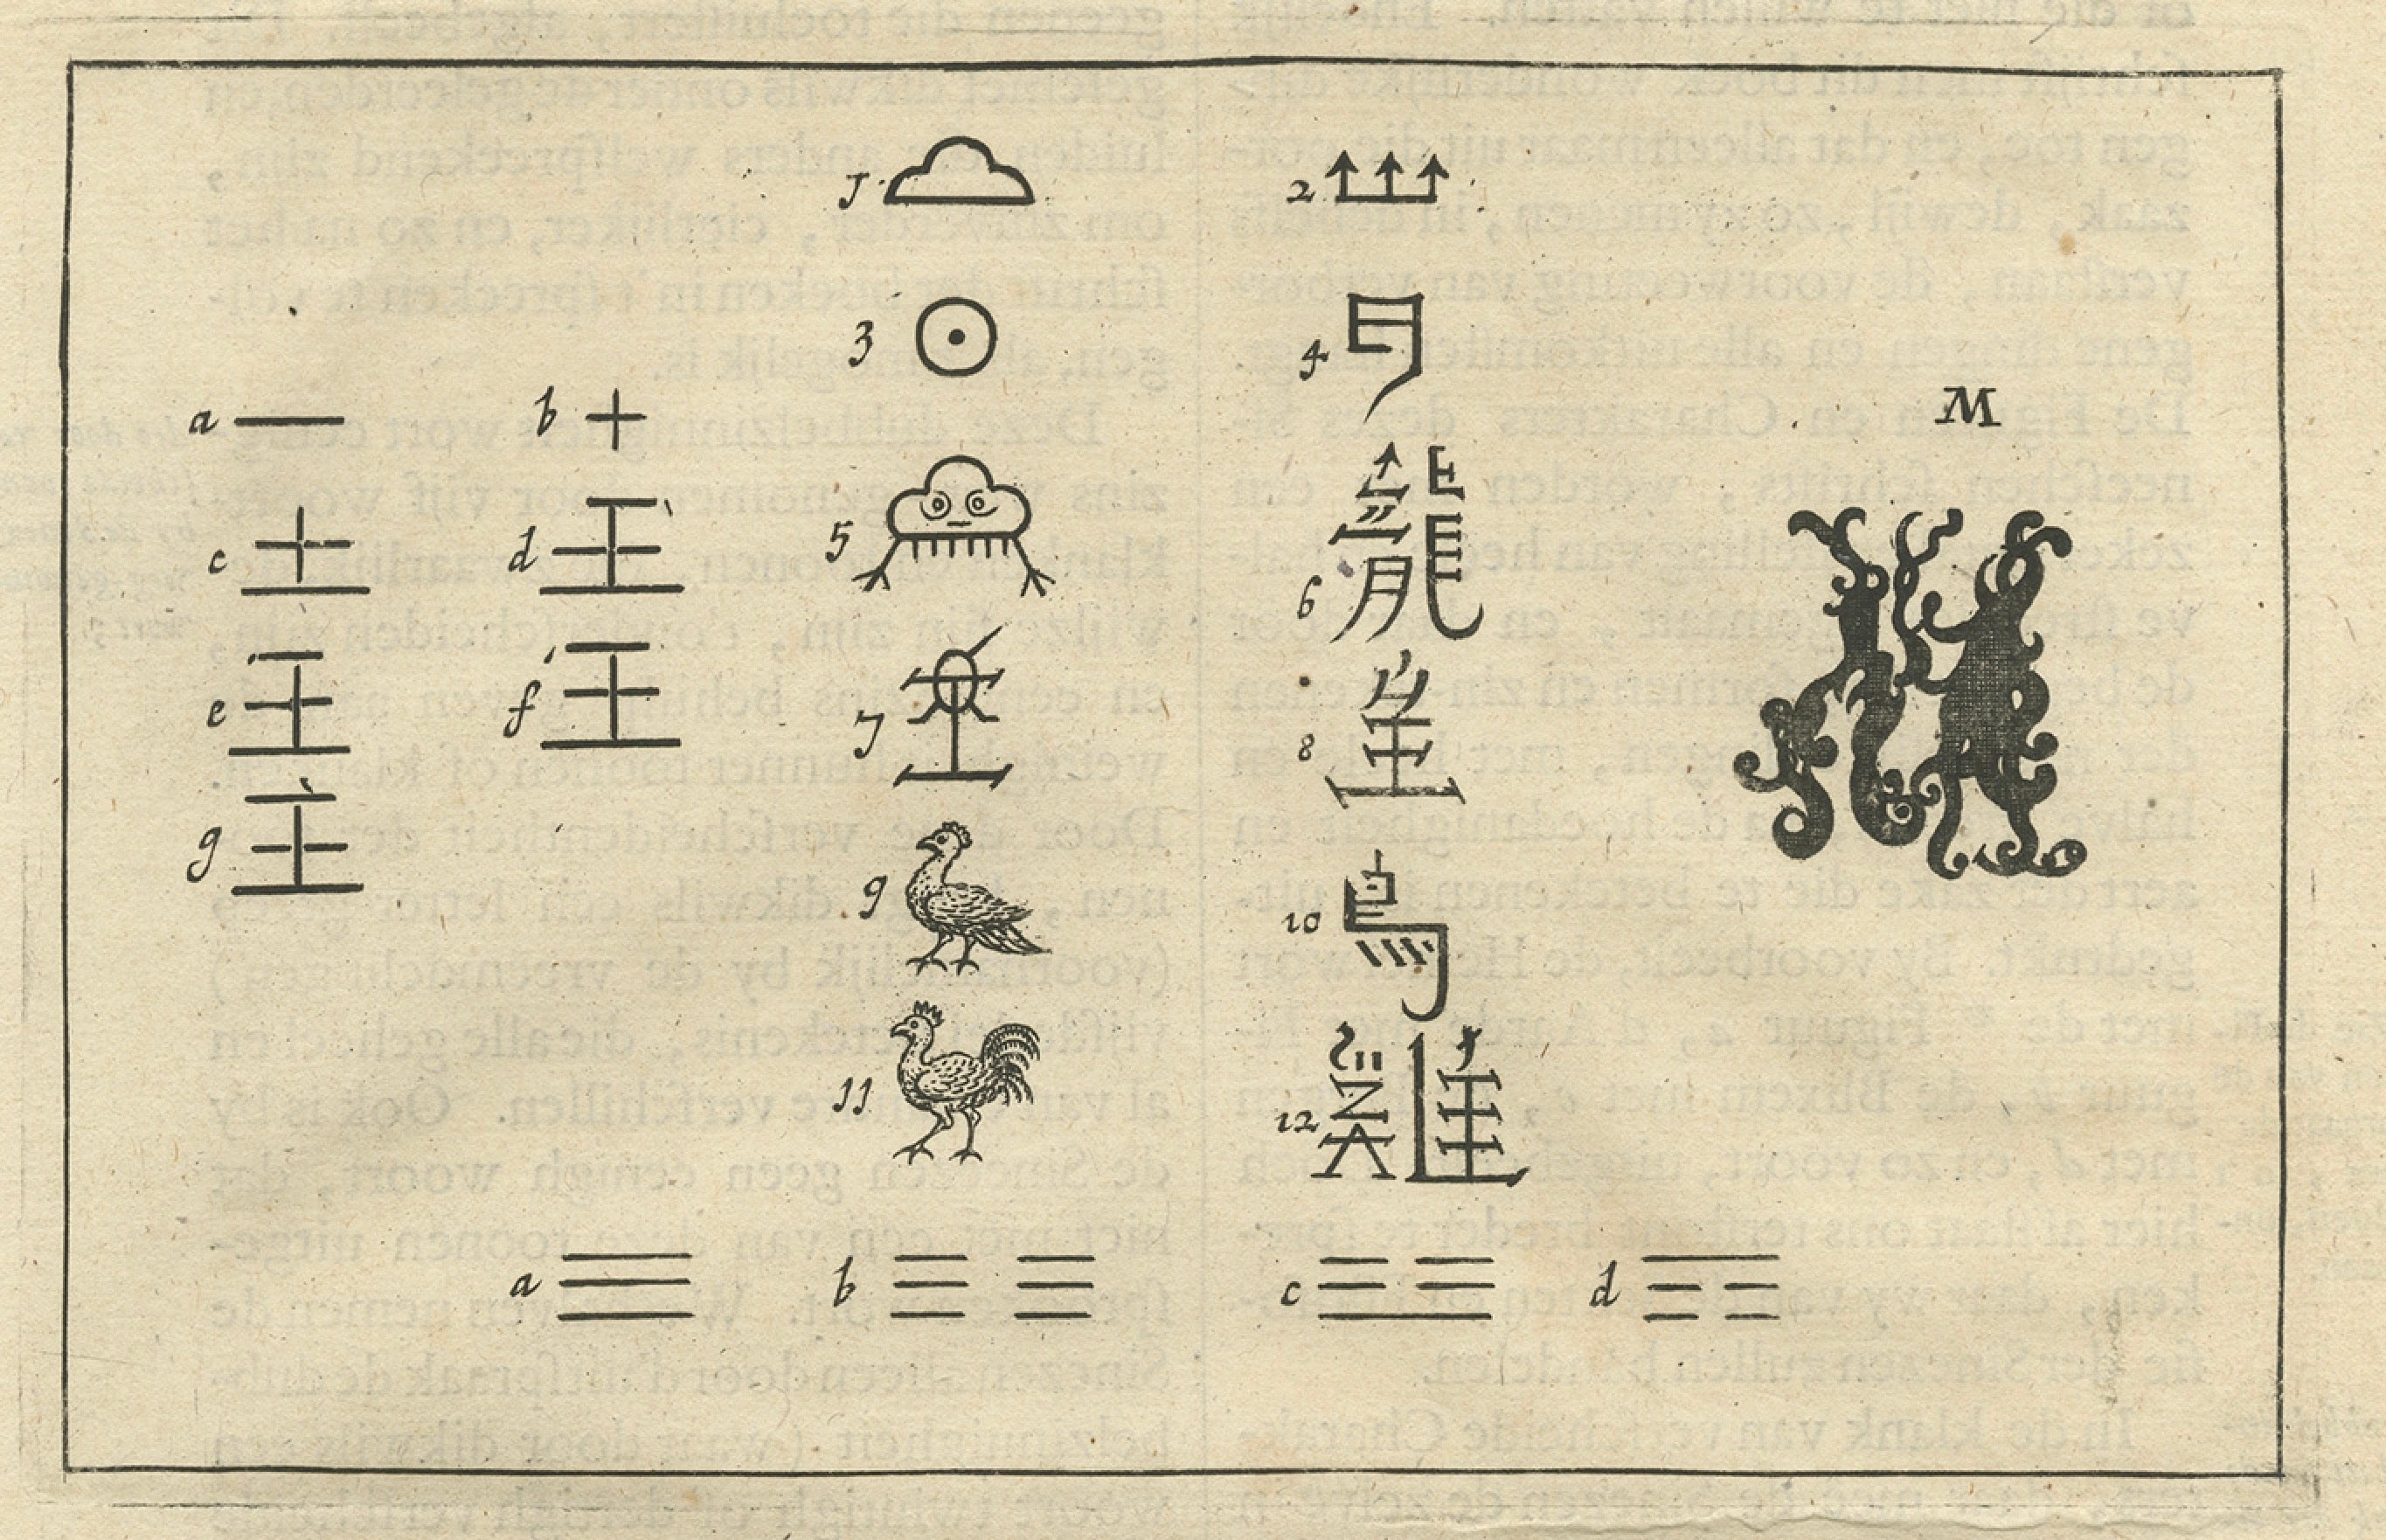 Old Original Engraving Print of the Chinese Alphabet, 1665